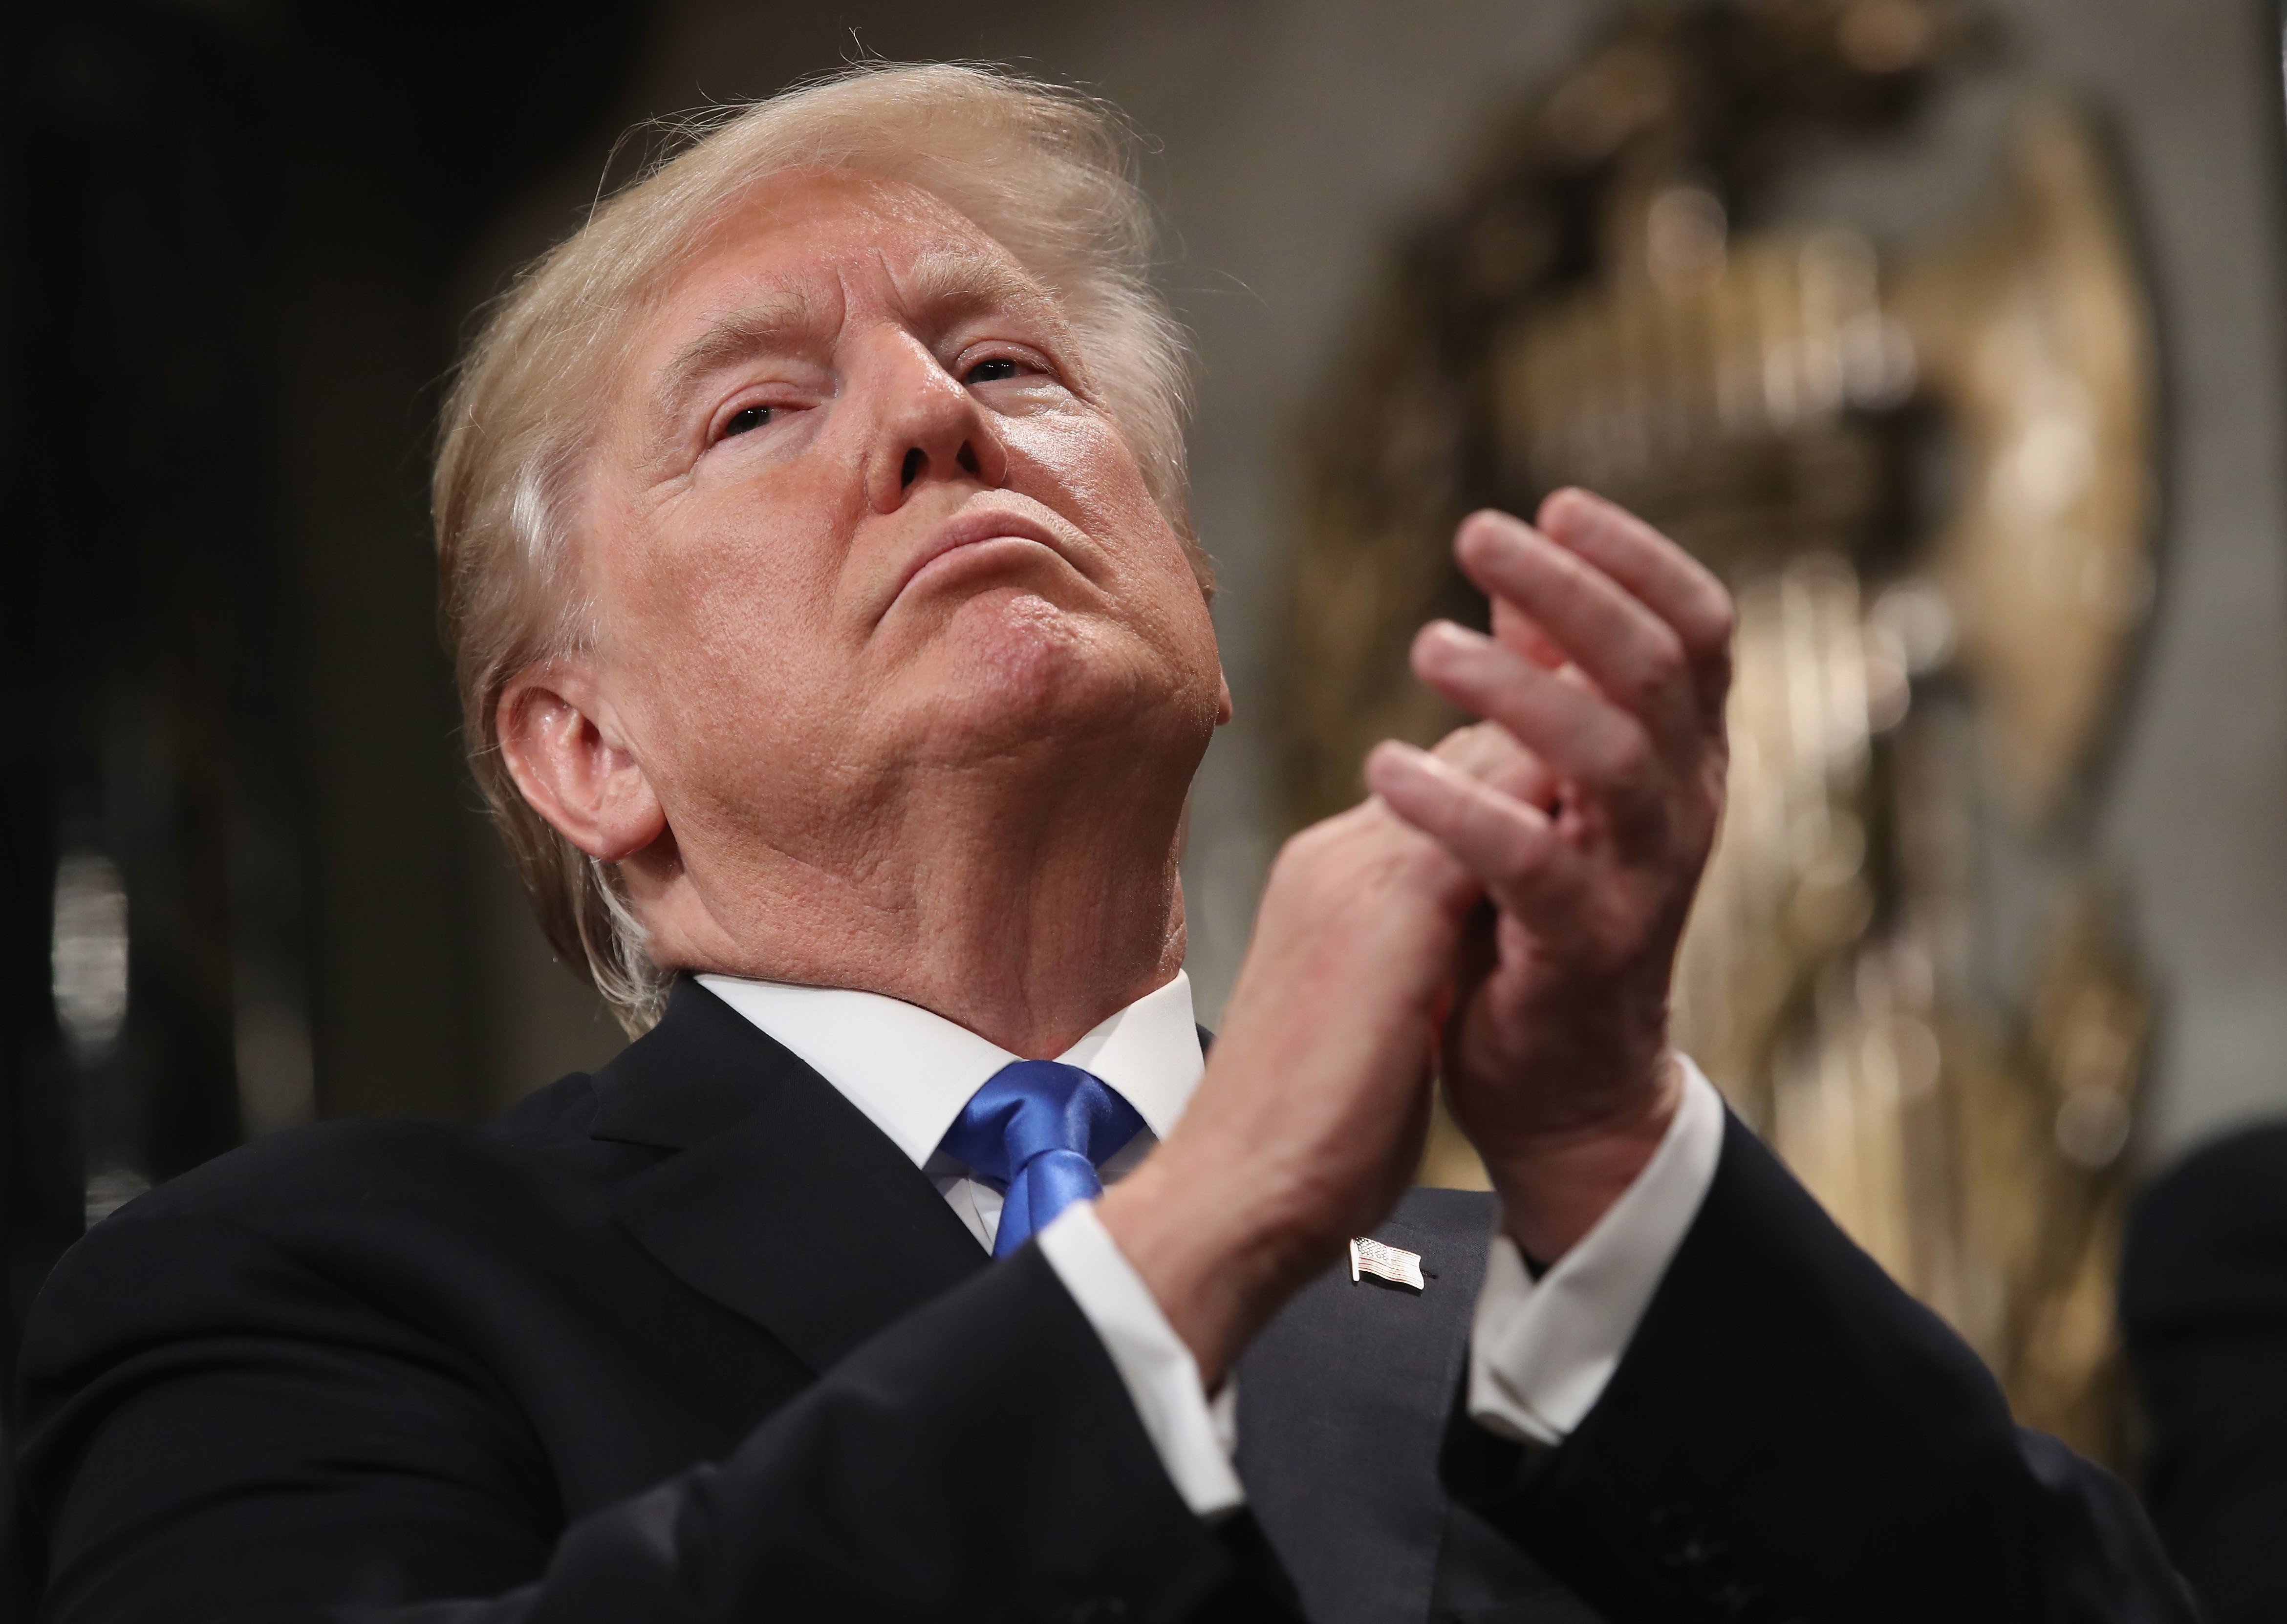 US President Donald Trump claps after finishing his first State of the Union address on January 30. Since delivering his unifying message, Trump’s decision to release a memo accusing the FBI and the Department of Justice of misconduct has widened the divide between the Republicans and the Democrats. Photo: EPA-EFE